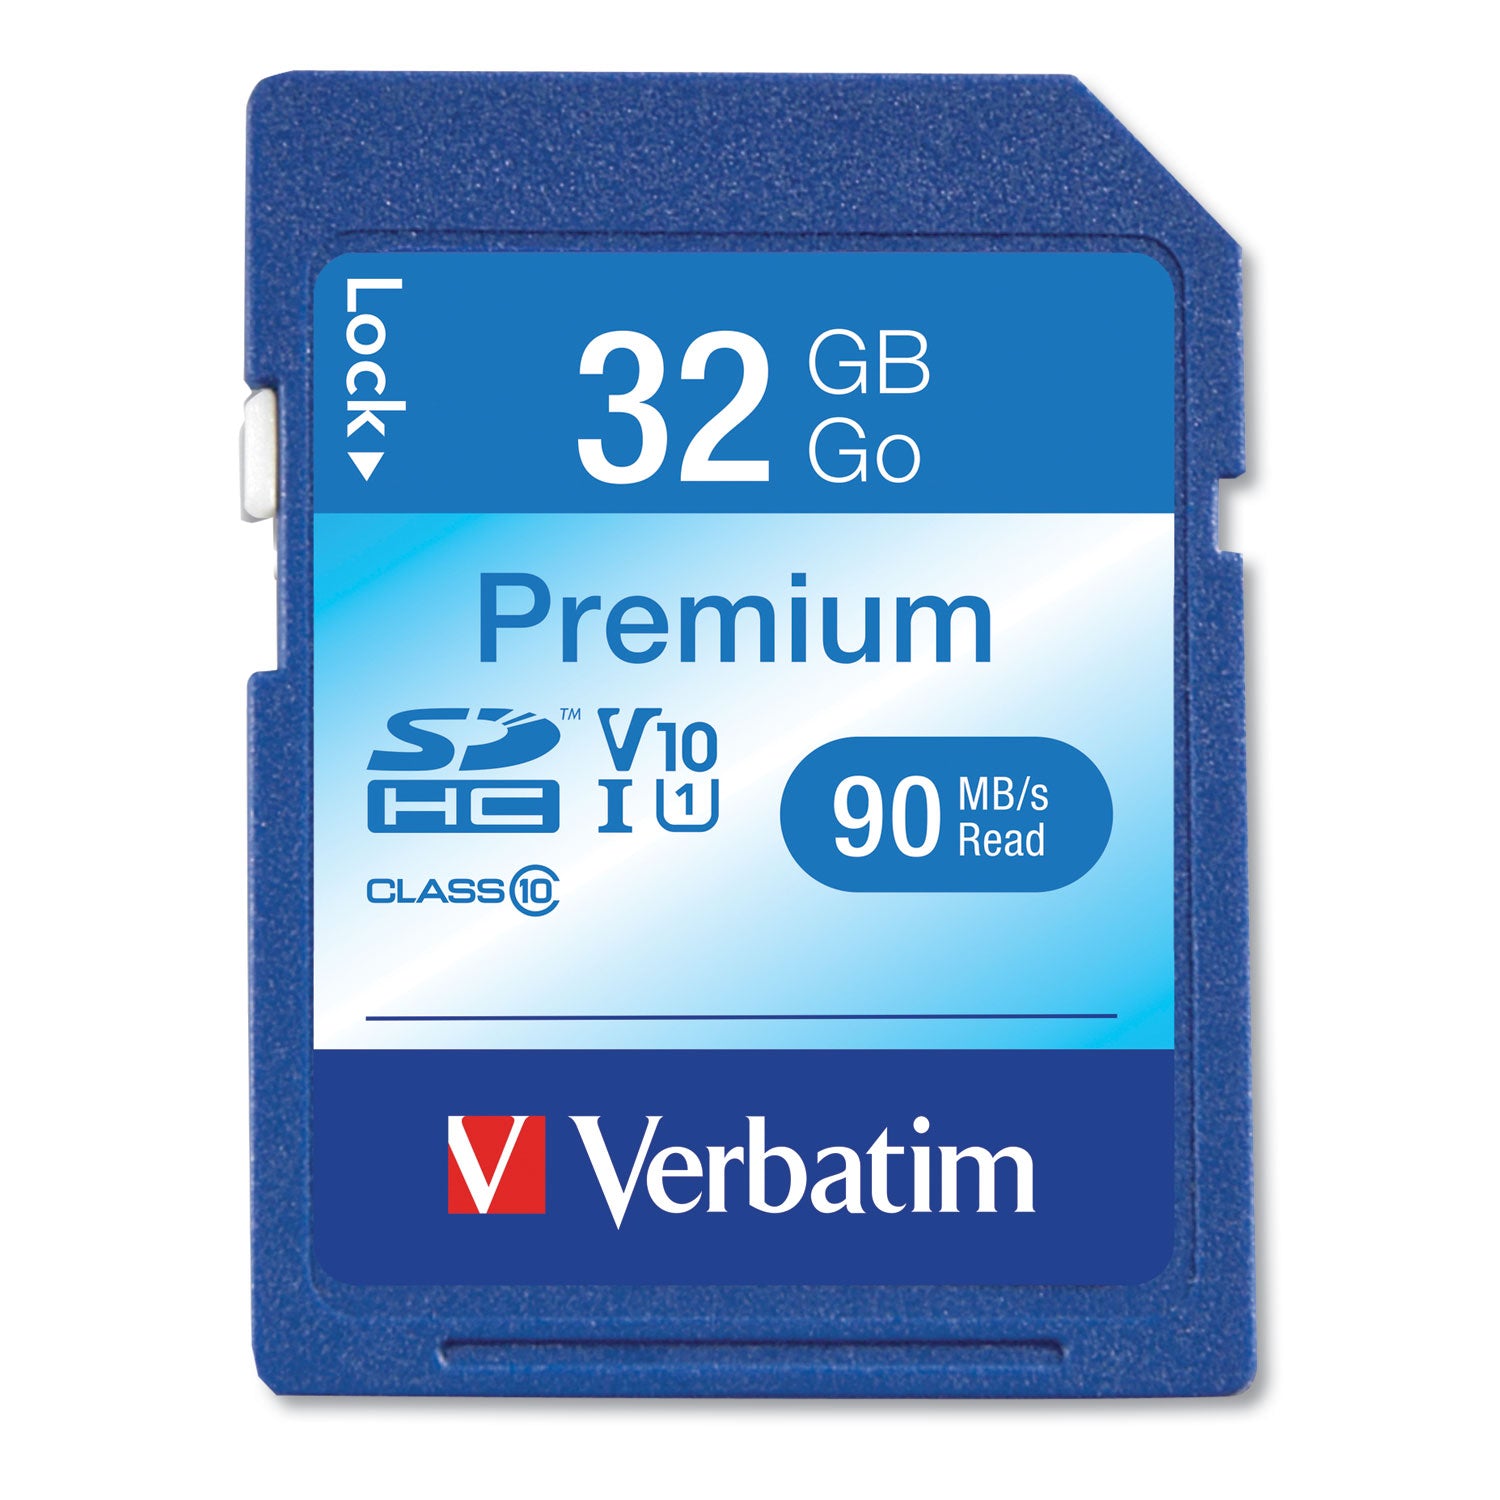 32GB Premium SDHC Memory Card, UHS-I V10 U1 Class 10, Up to 90MB/s Read Speed - 